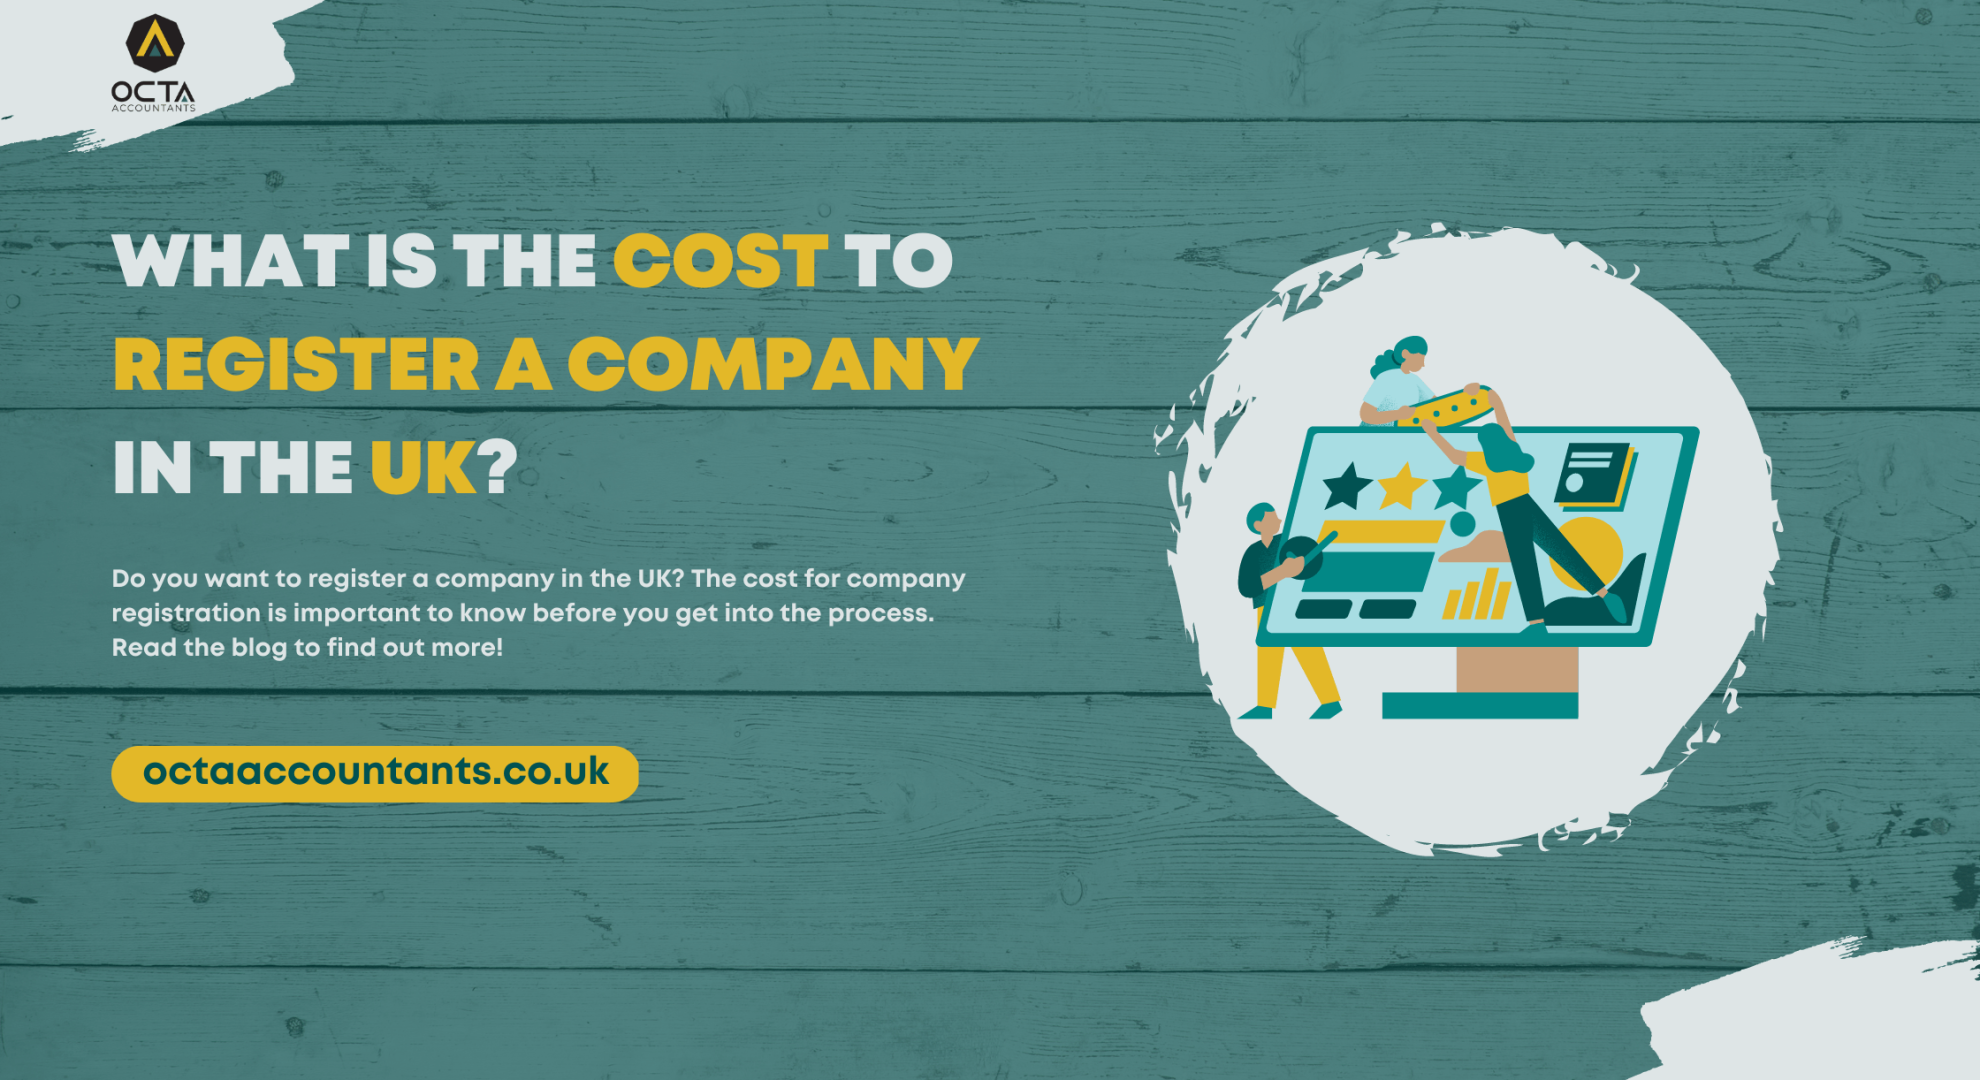 What is the cost to register a company in the UK